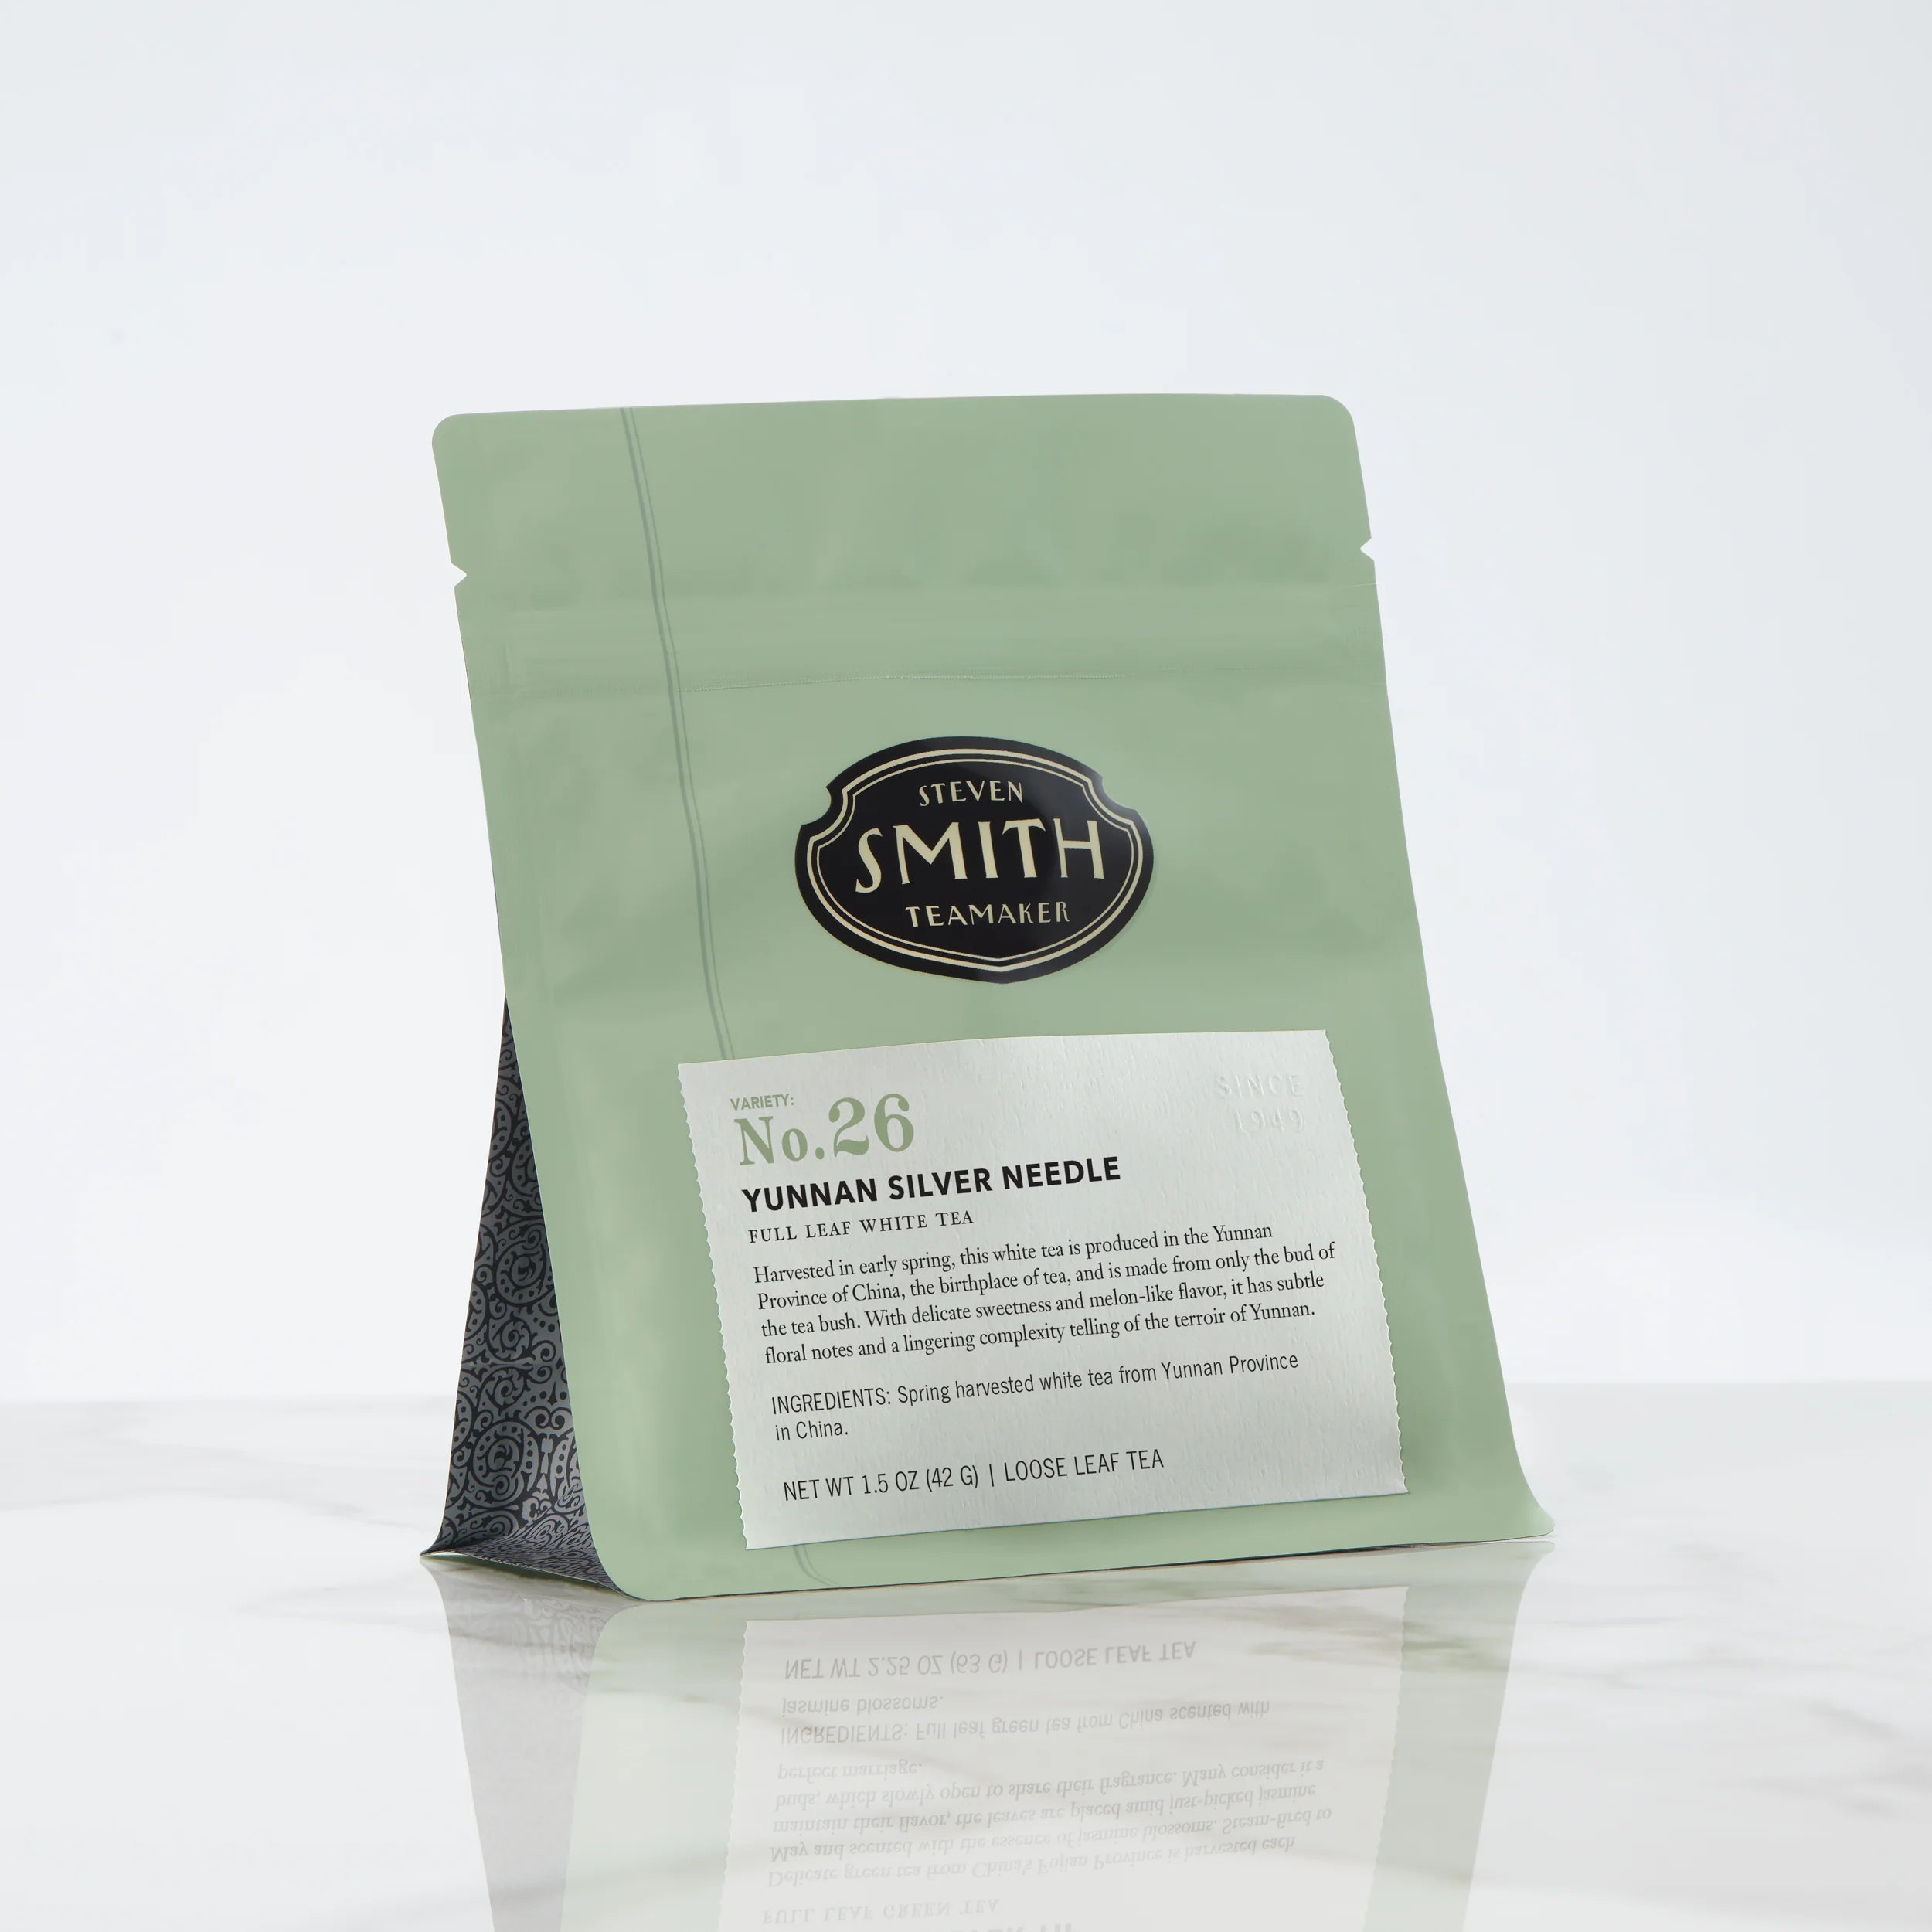 Green bag of loose leaf tea with Smith shield and Yunnan Silver Needle label